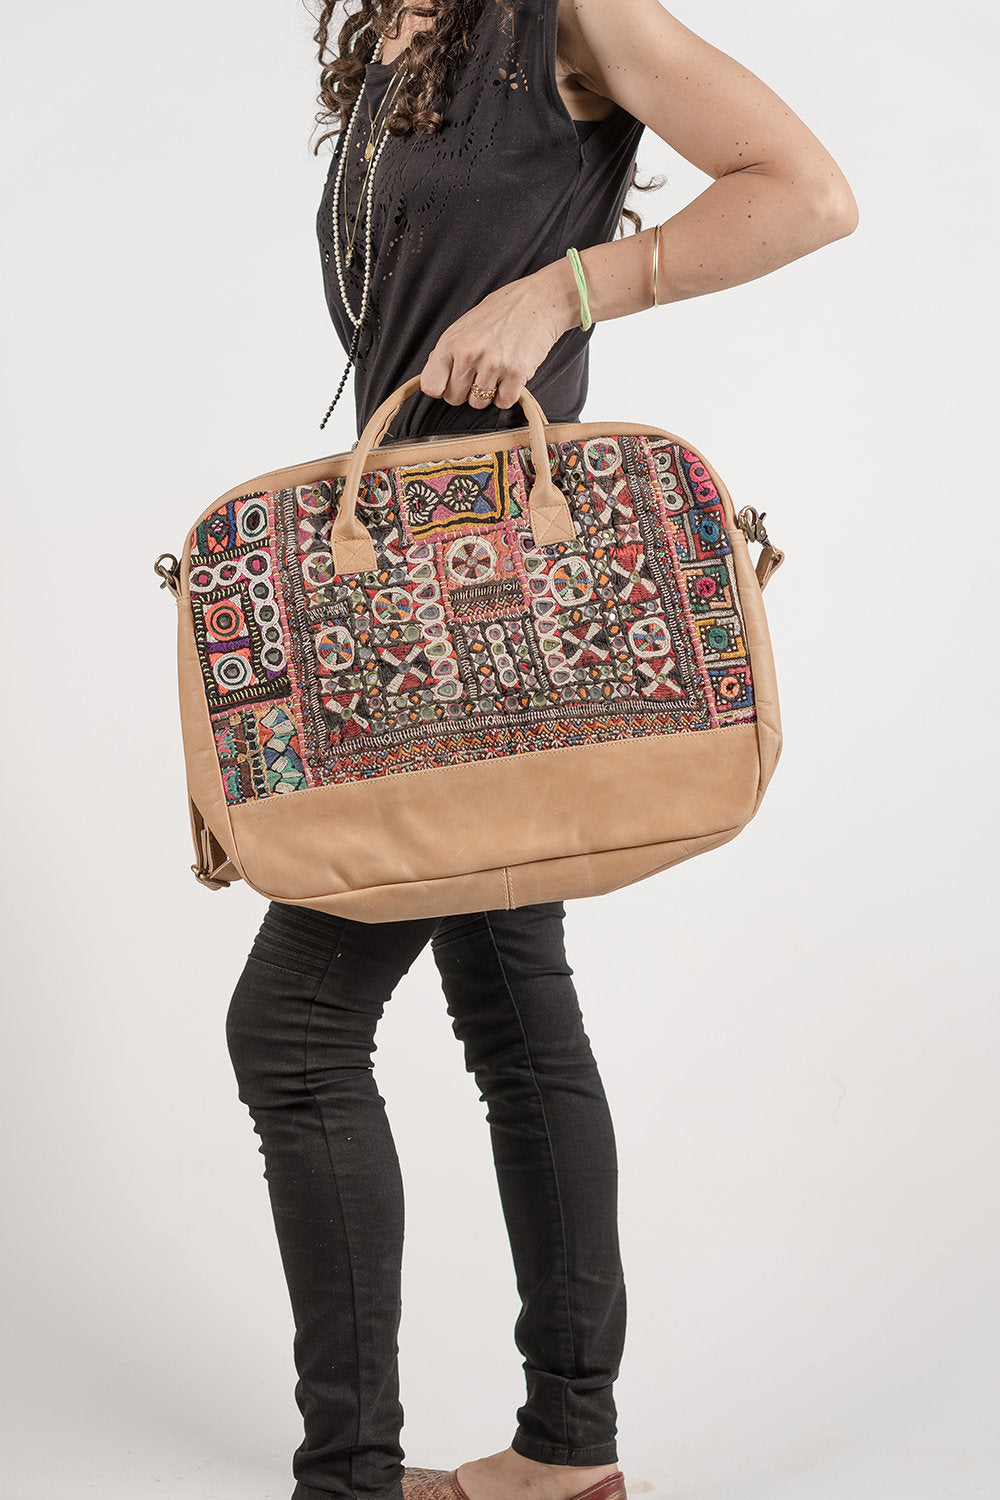 Boho Style Laptop Bag with Antique Embroidery